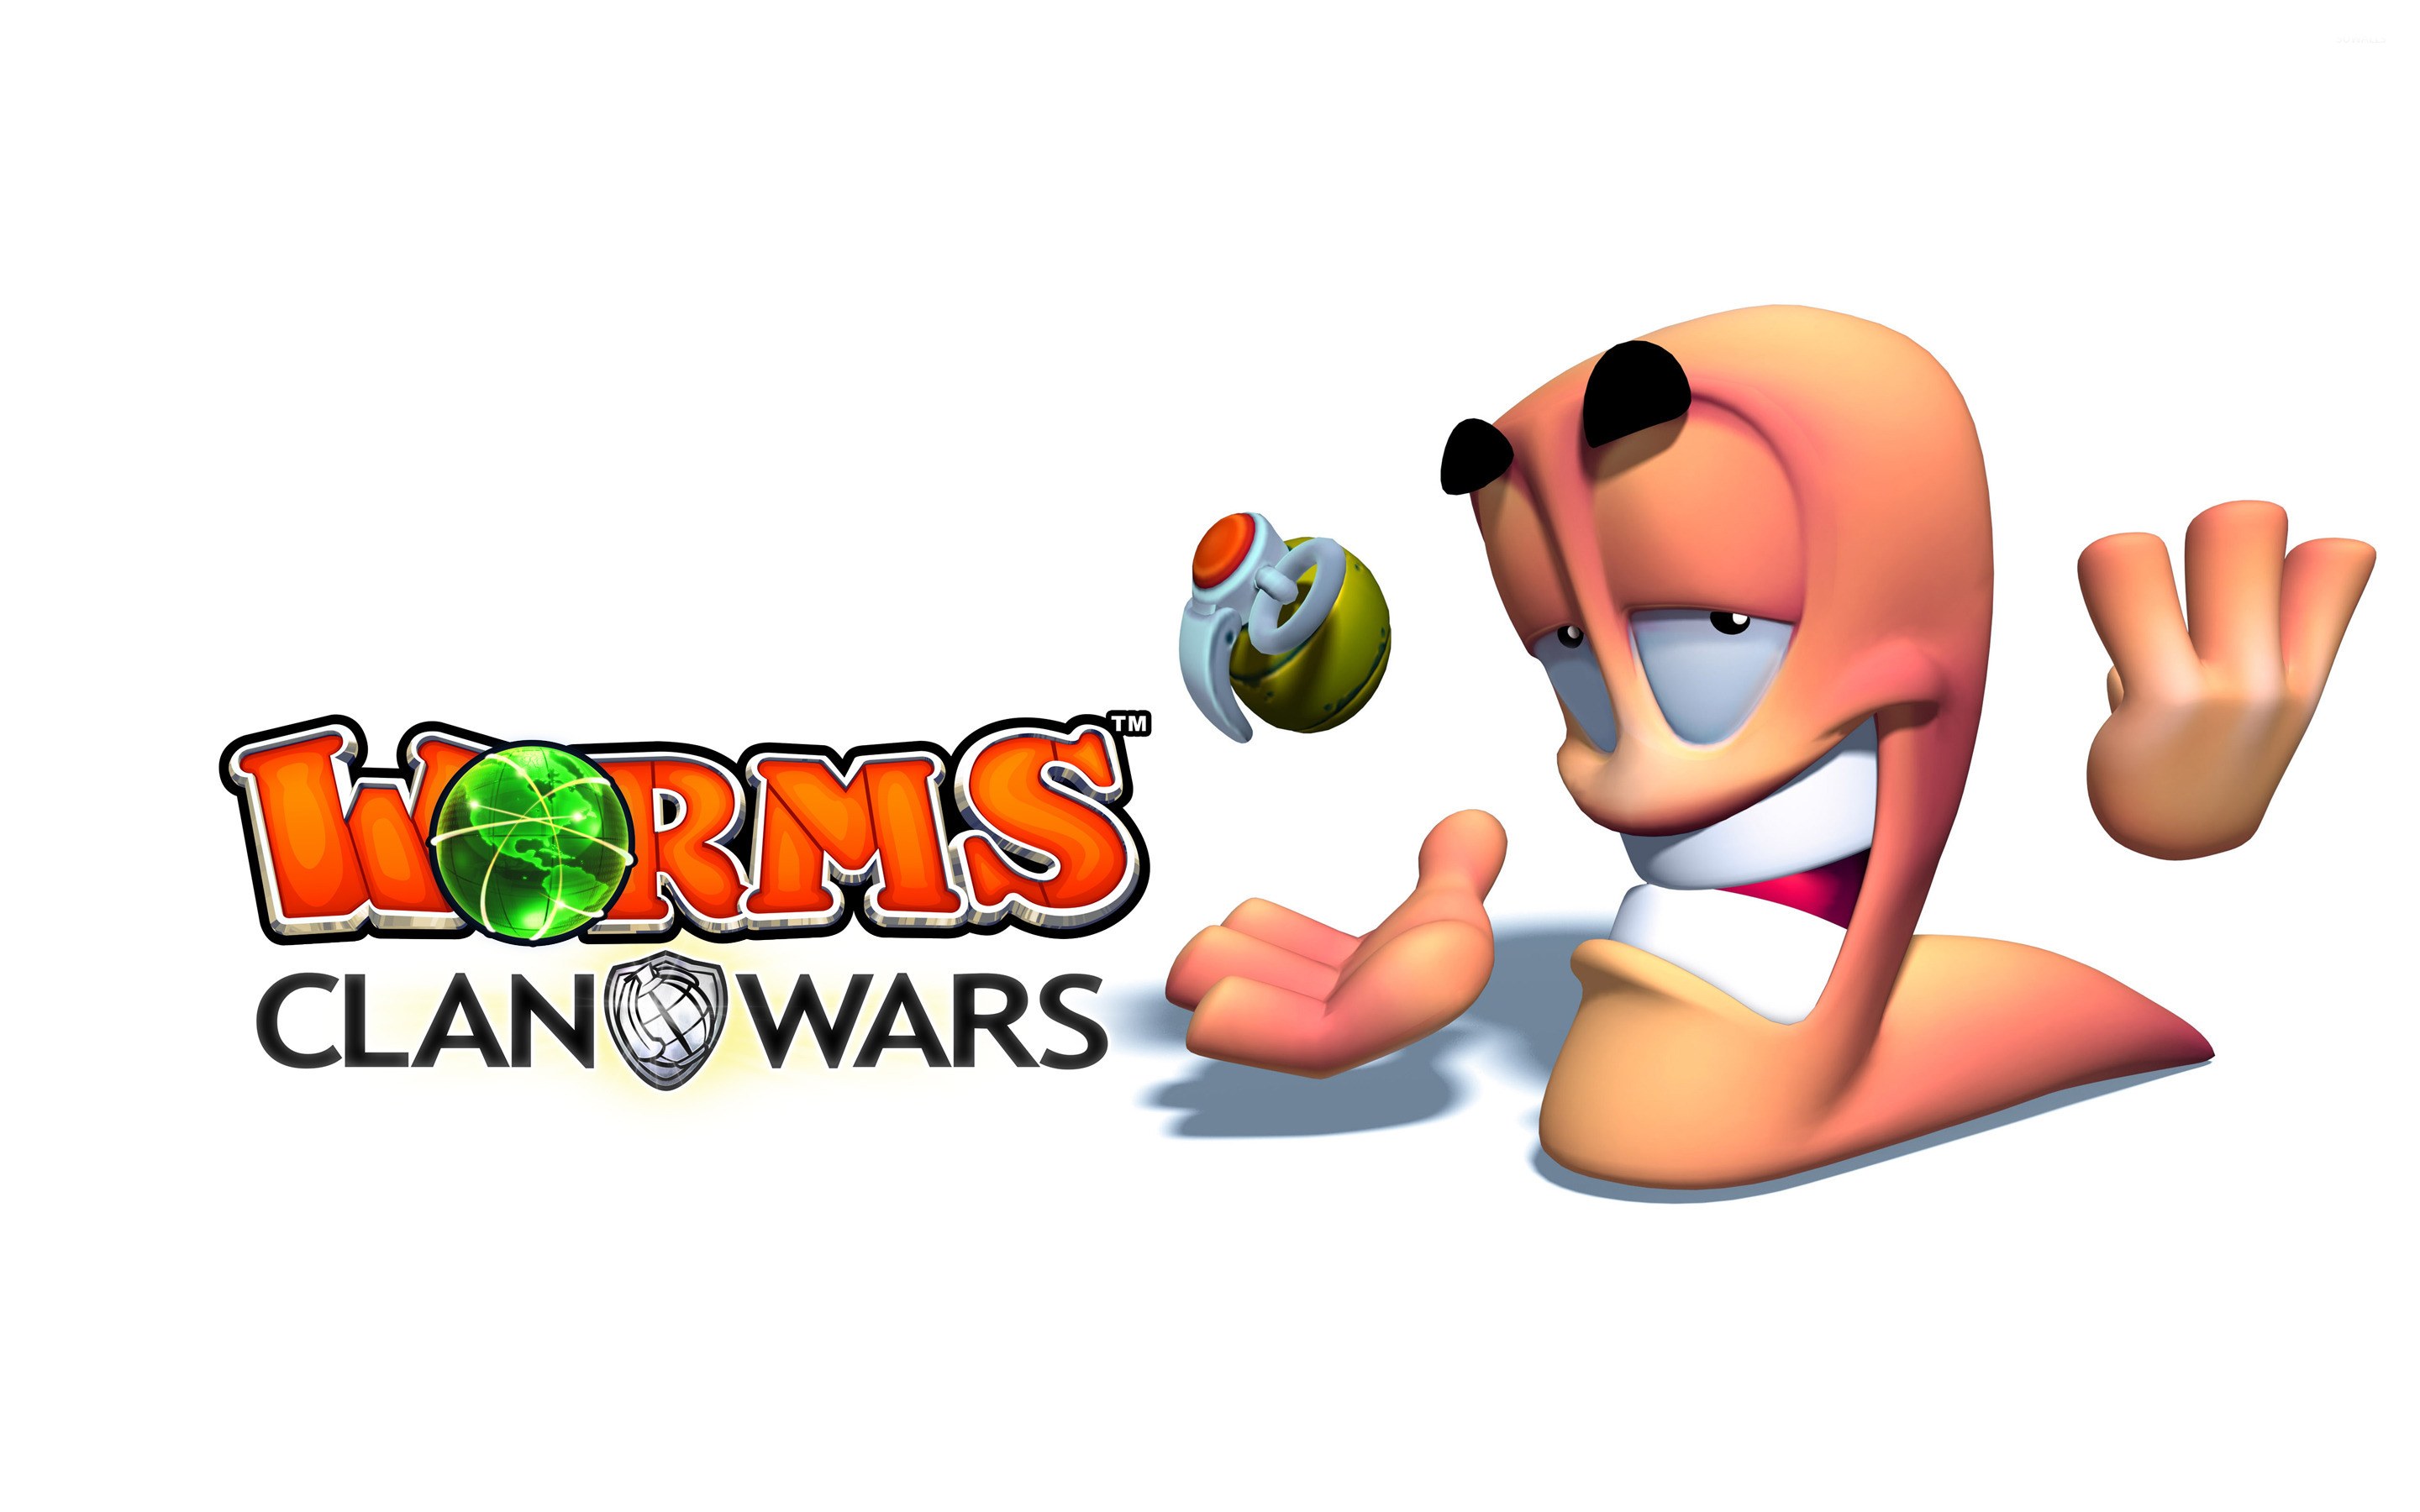 Worms clan